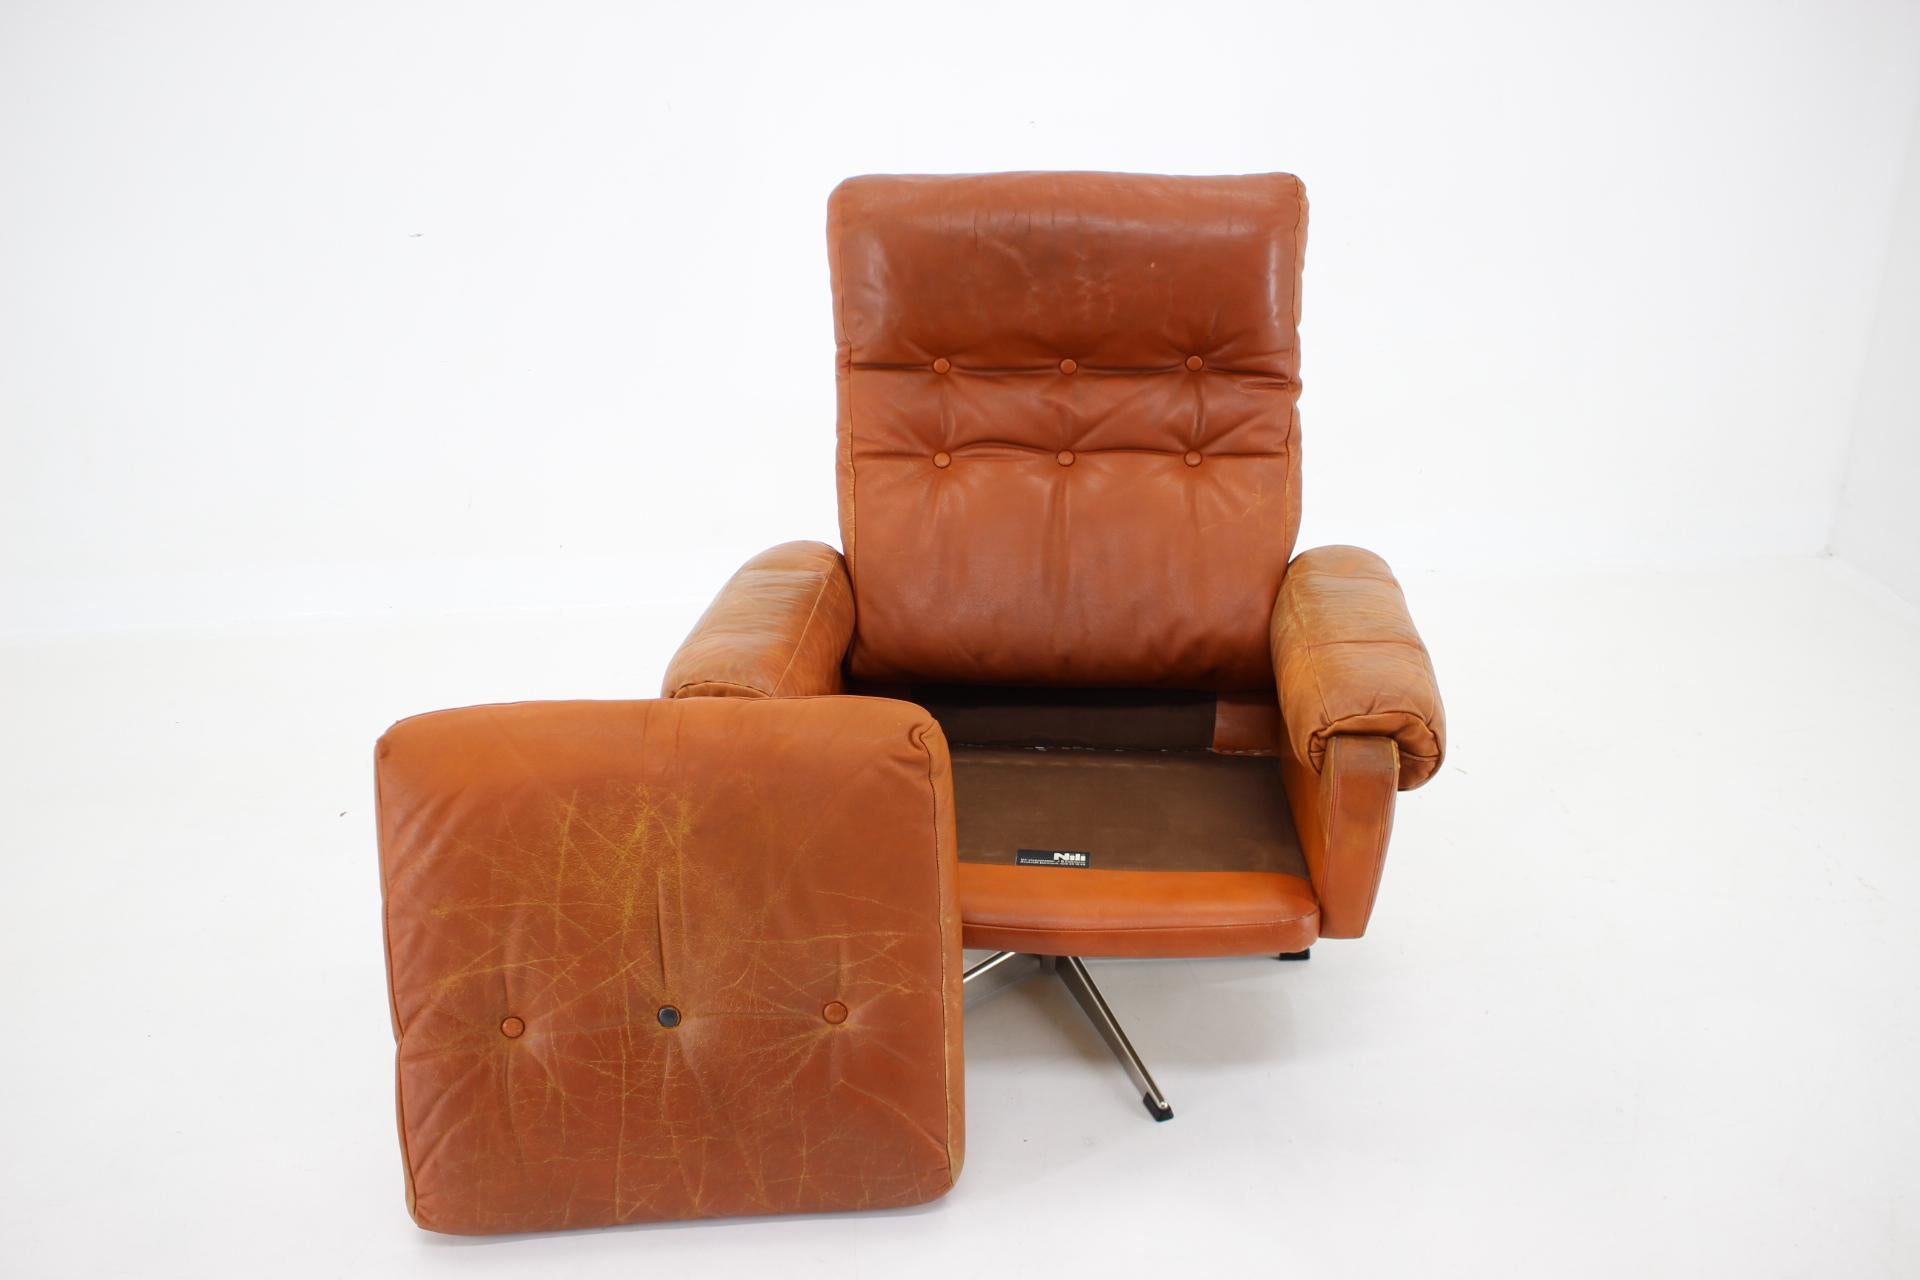 1970s Leather Swivel Armchair by Nili Stoppmobler, Denmark For Sale 3